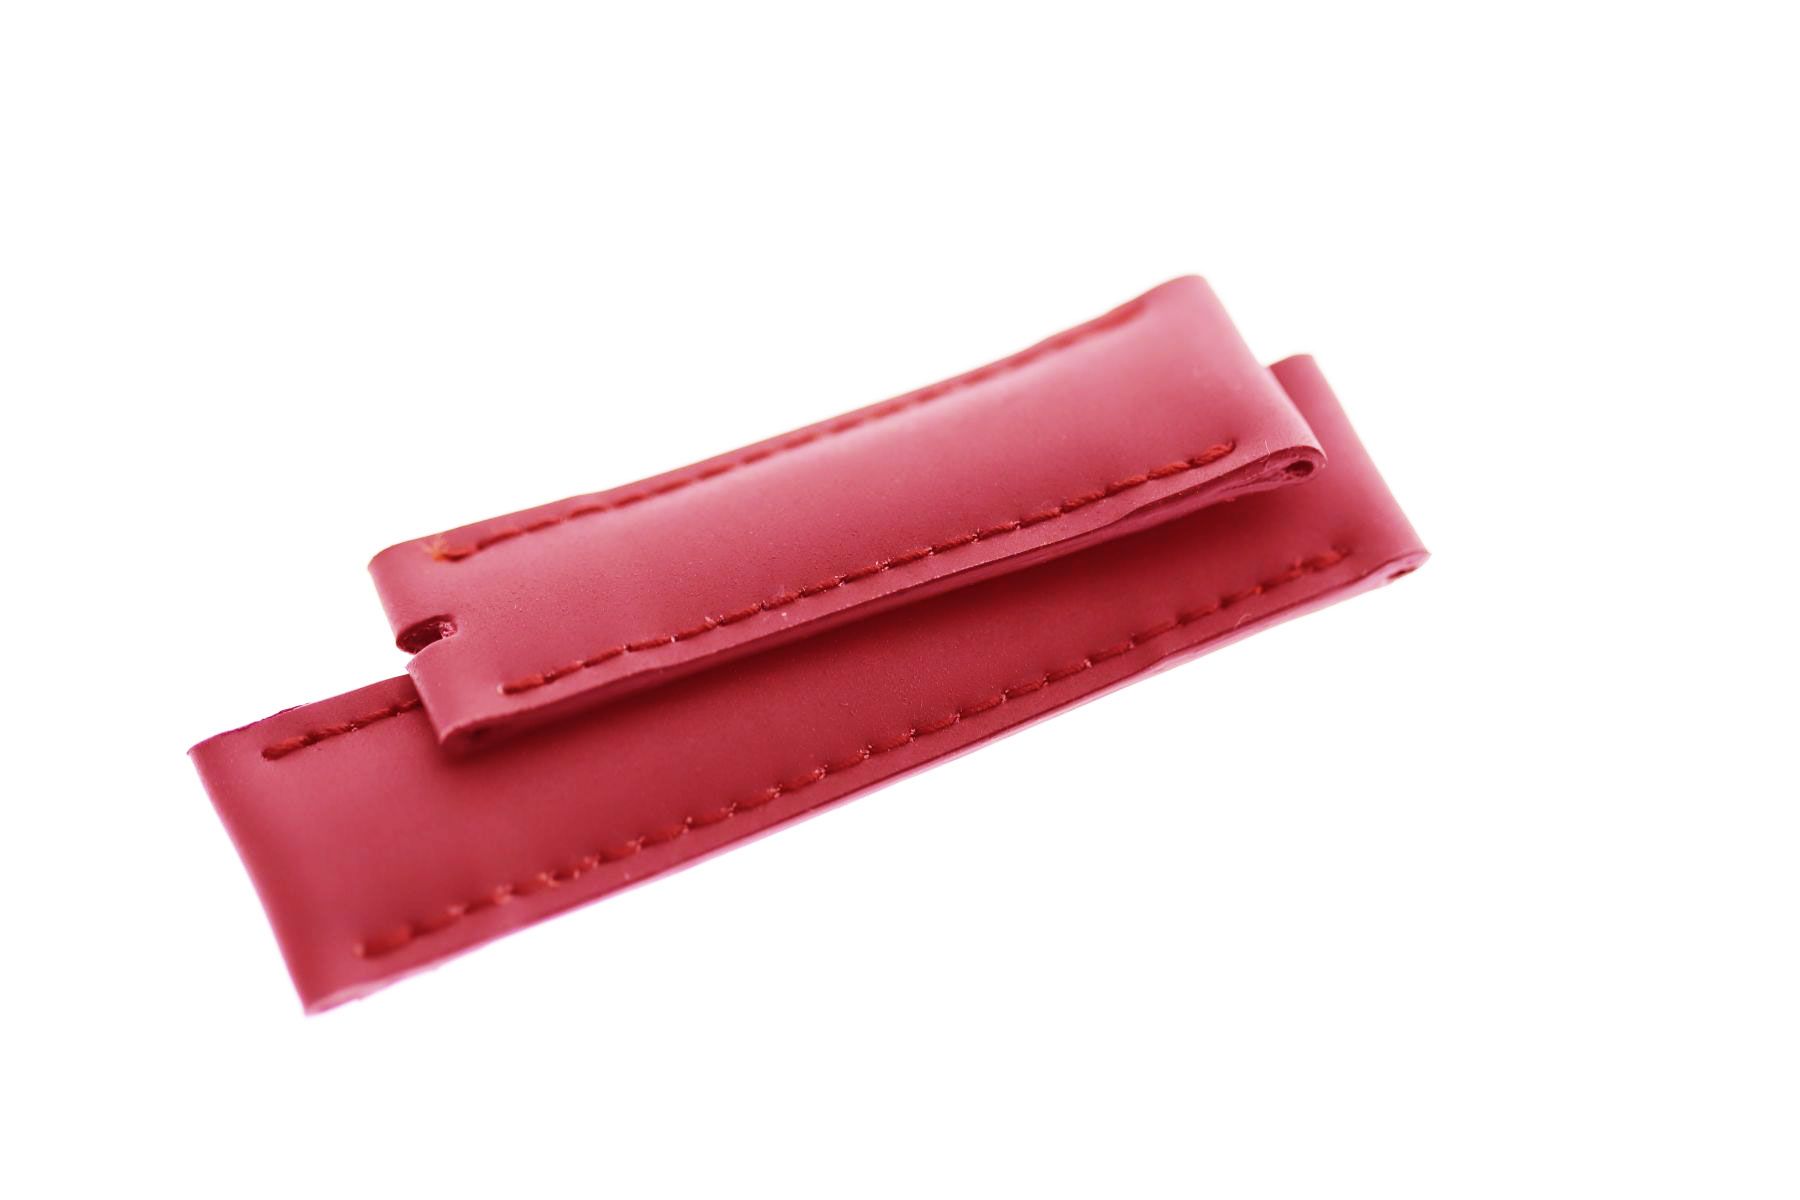 Red Rubberized bio-based Corn leather strap 21mm Rolex Sky-Dweller style